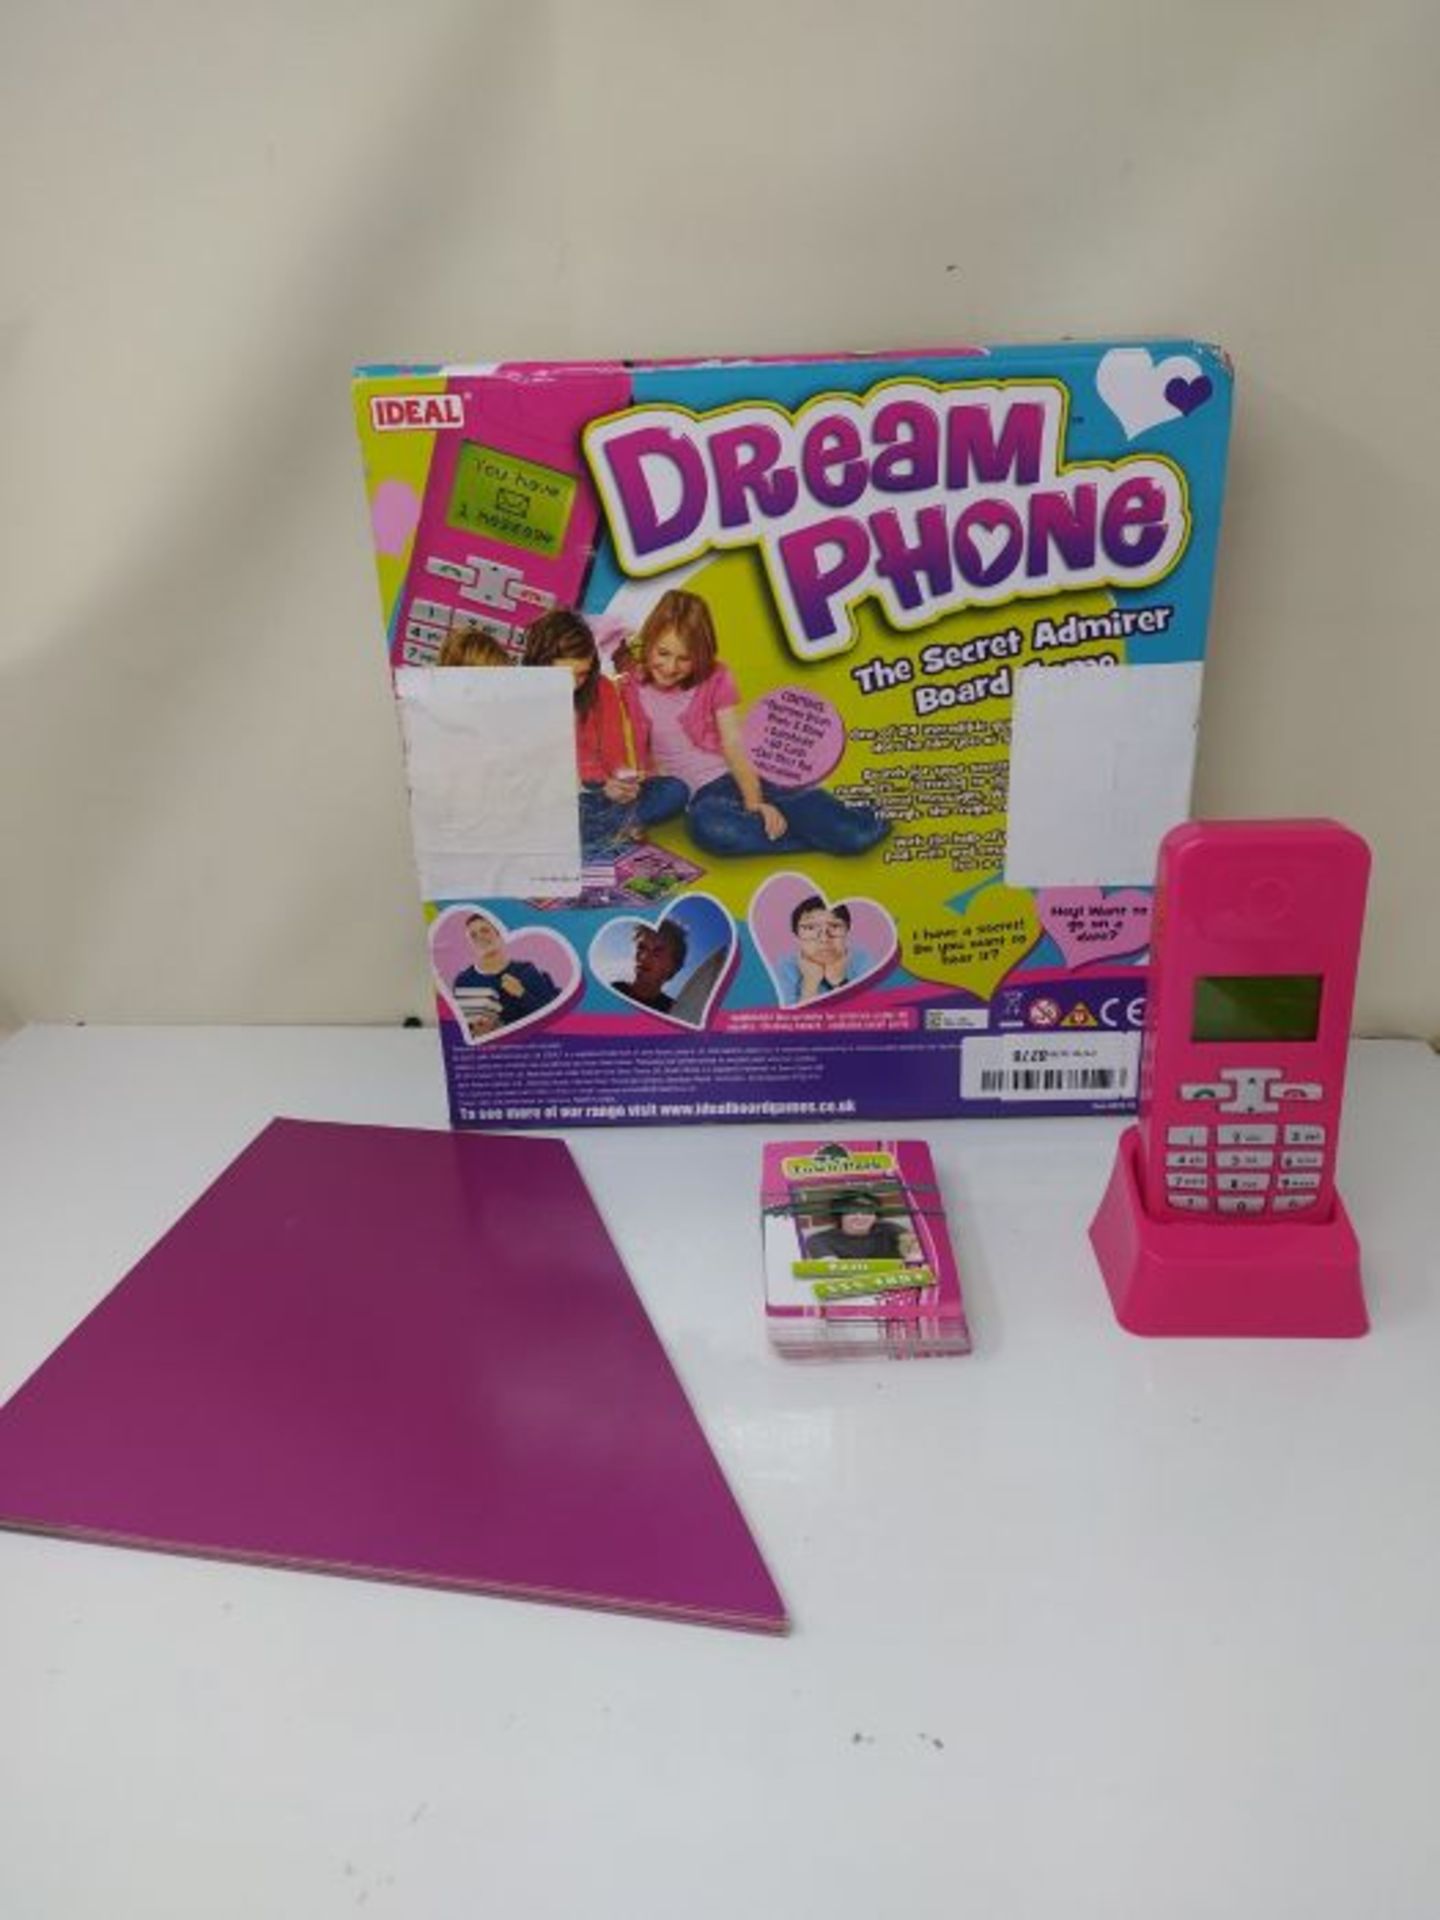 Dream Phone The Secret Admirer Board Game - Image 2 of 2